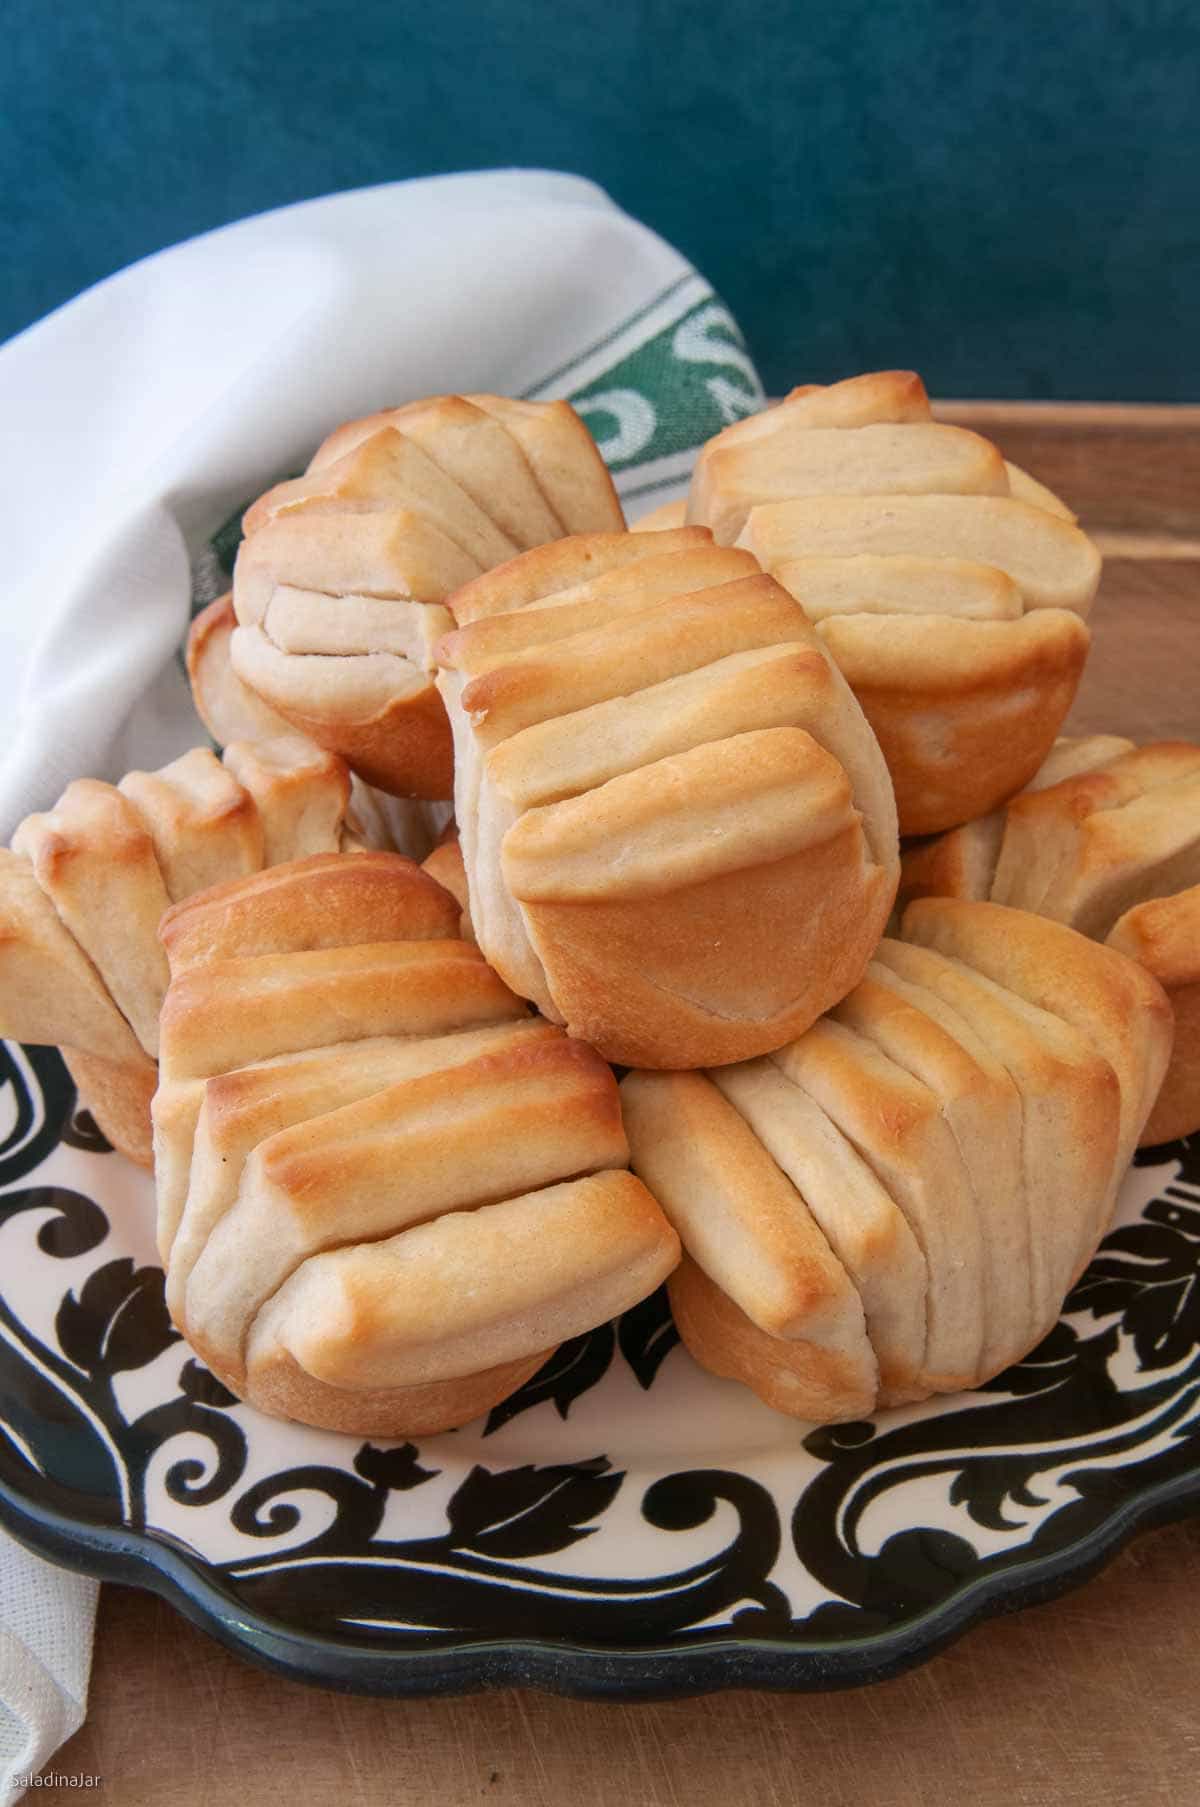 Baked yogurt bread shaped into Fantan shapes to look like brown and serve dinner rolls.